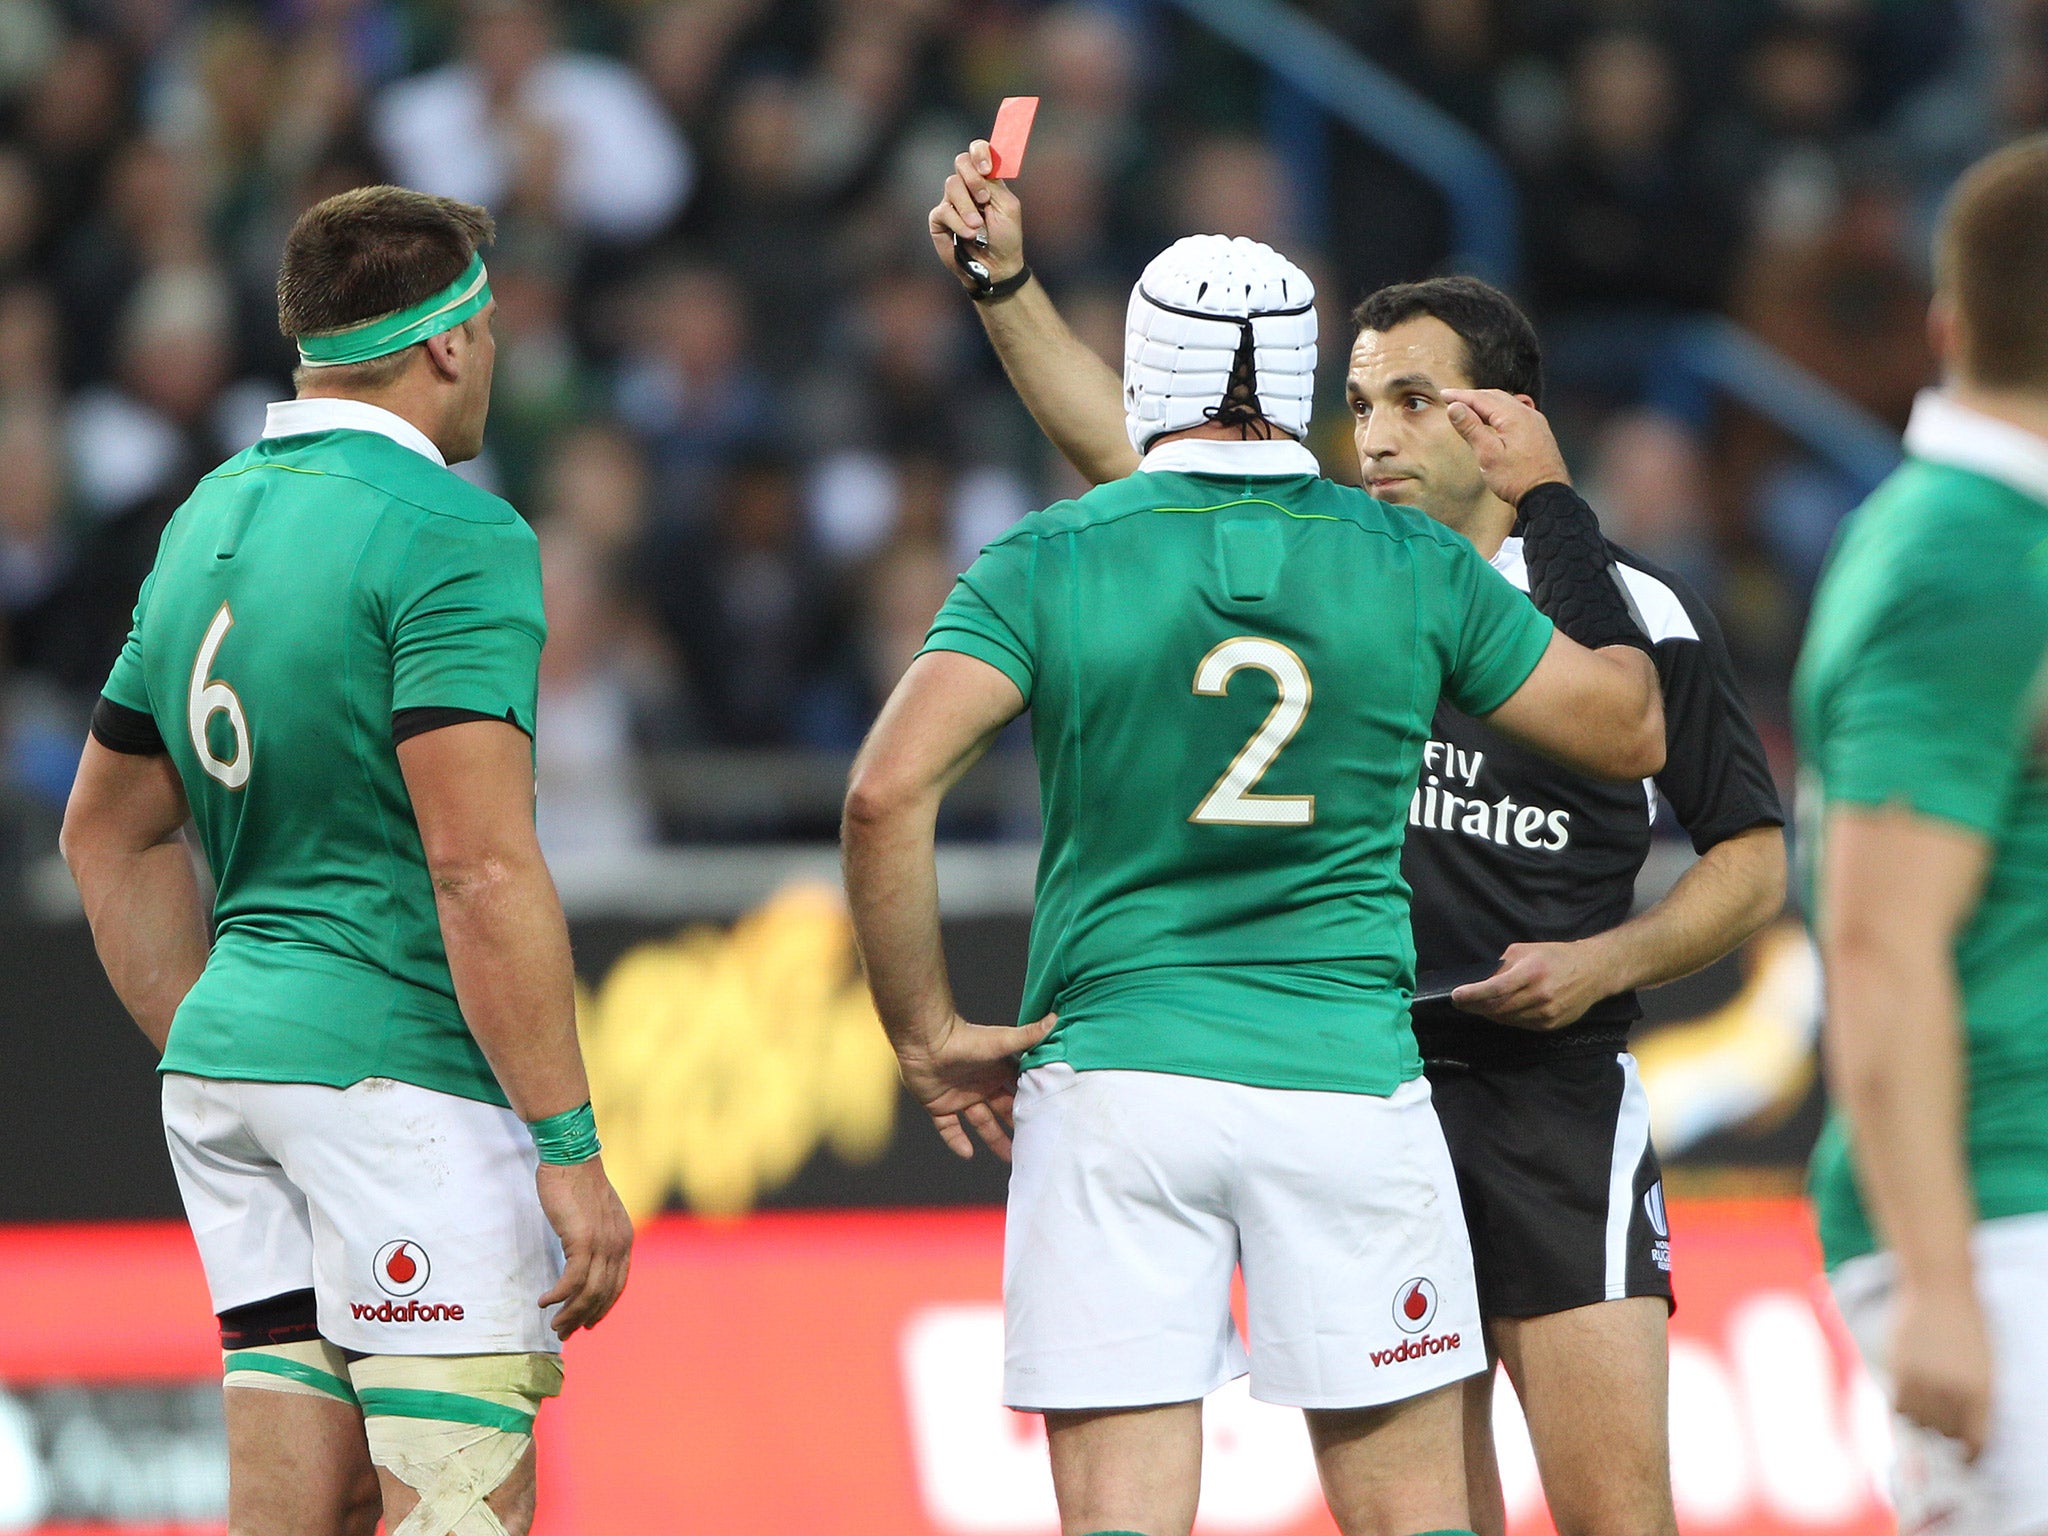 CJ Stander is sent-off after a late hit on South Africa fly-half Pat Lambie